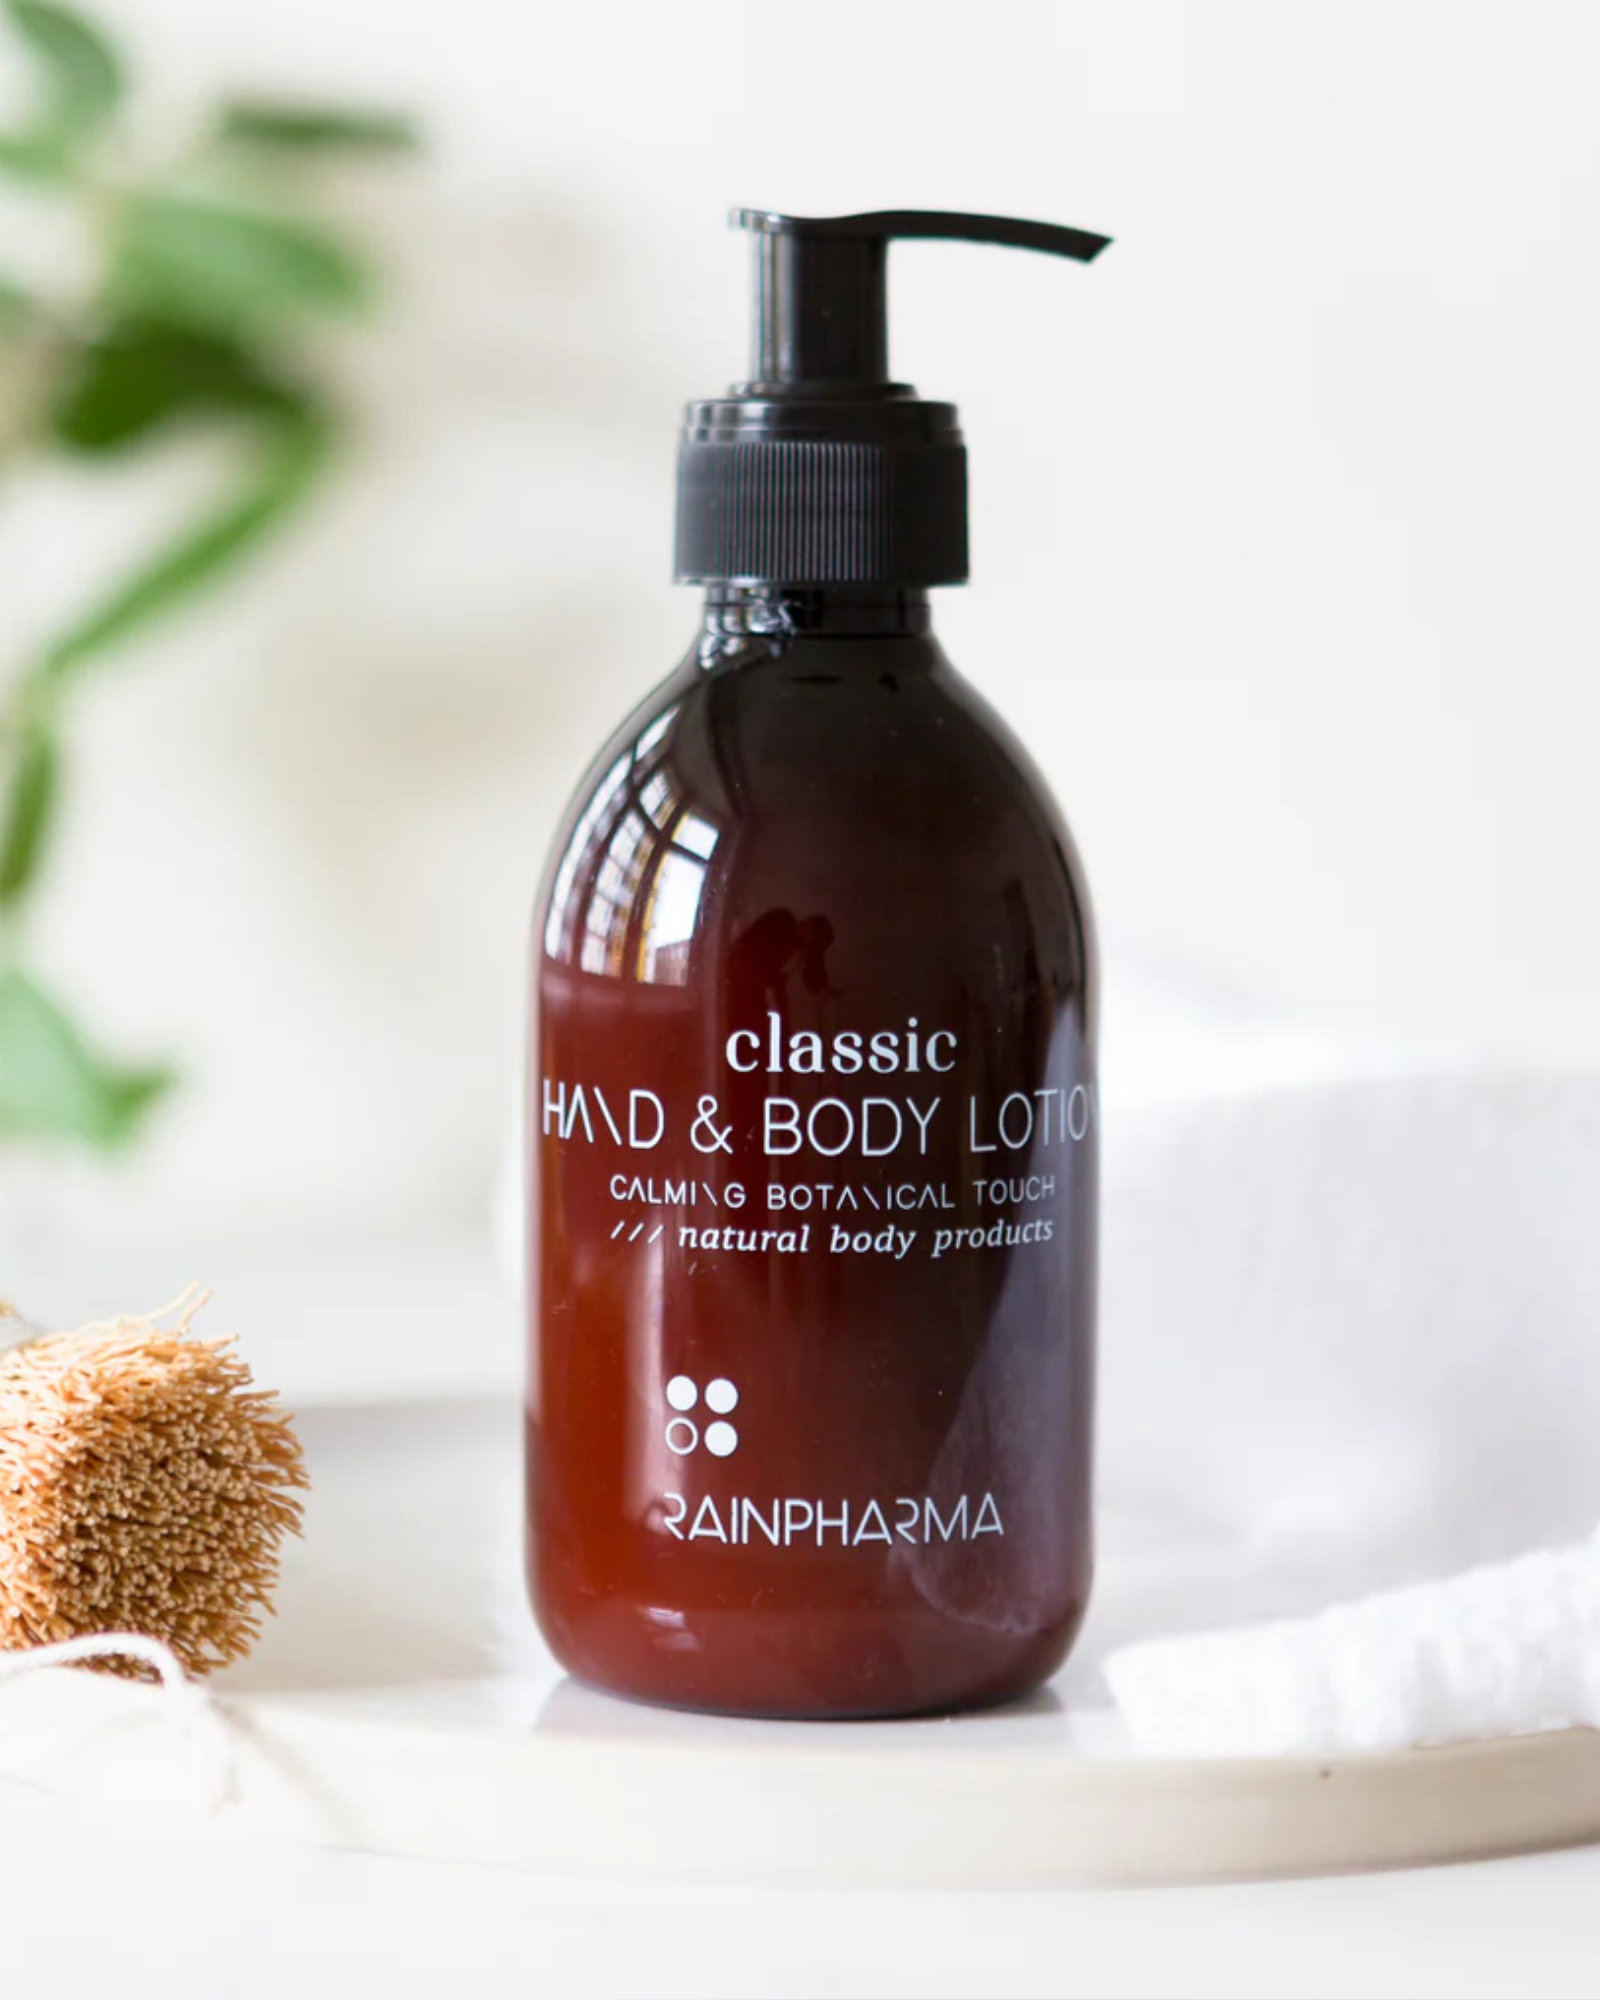 Classic Hand & Body Lotion BOTANICAL TOUCH